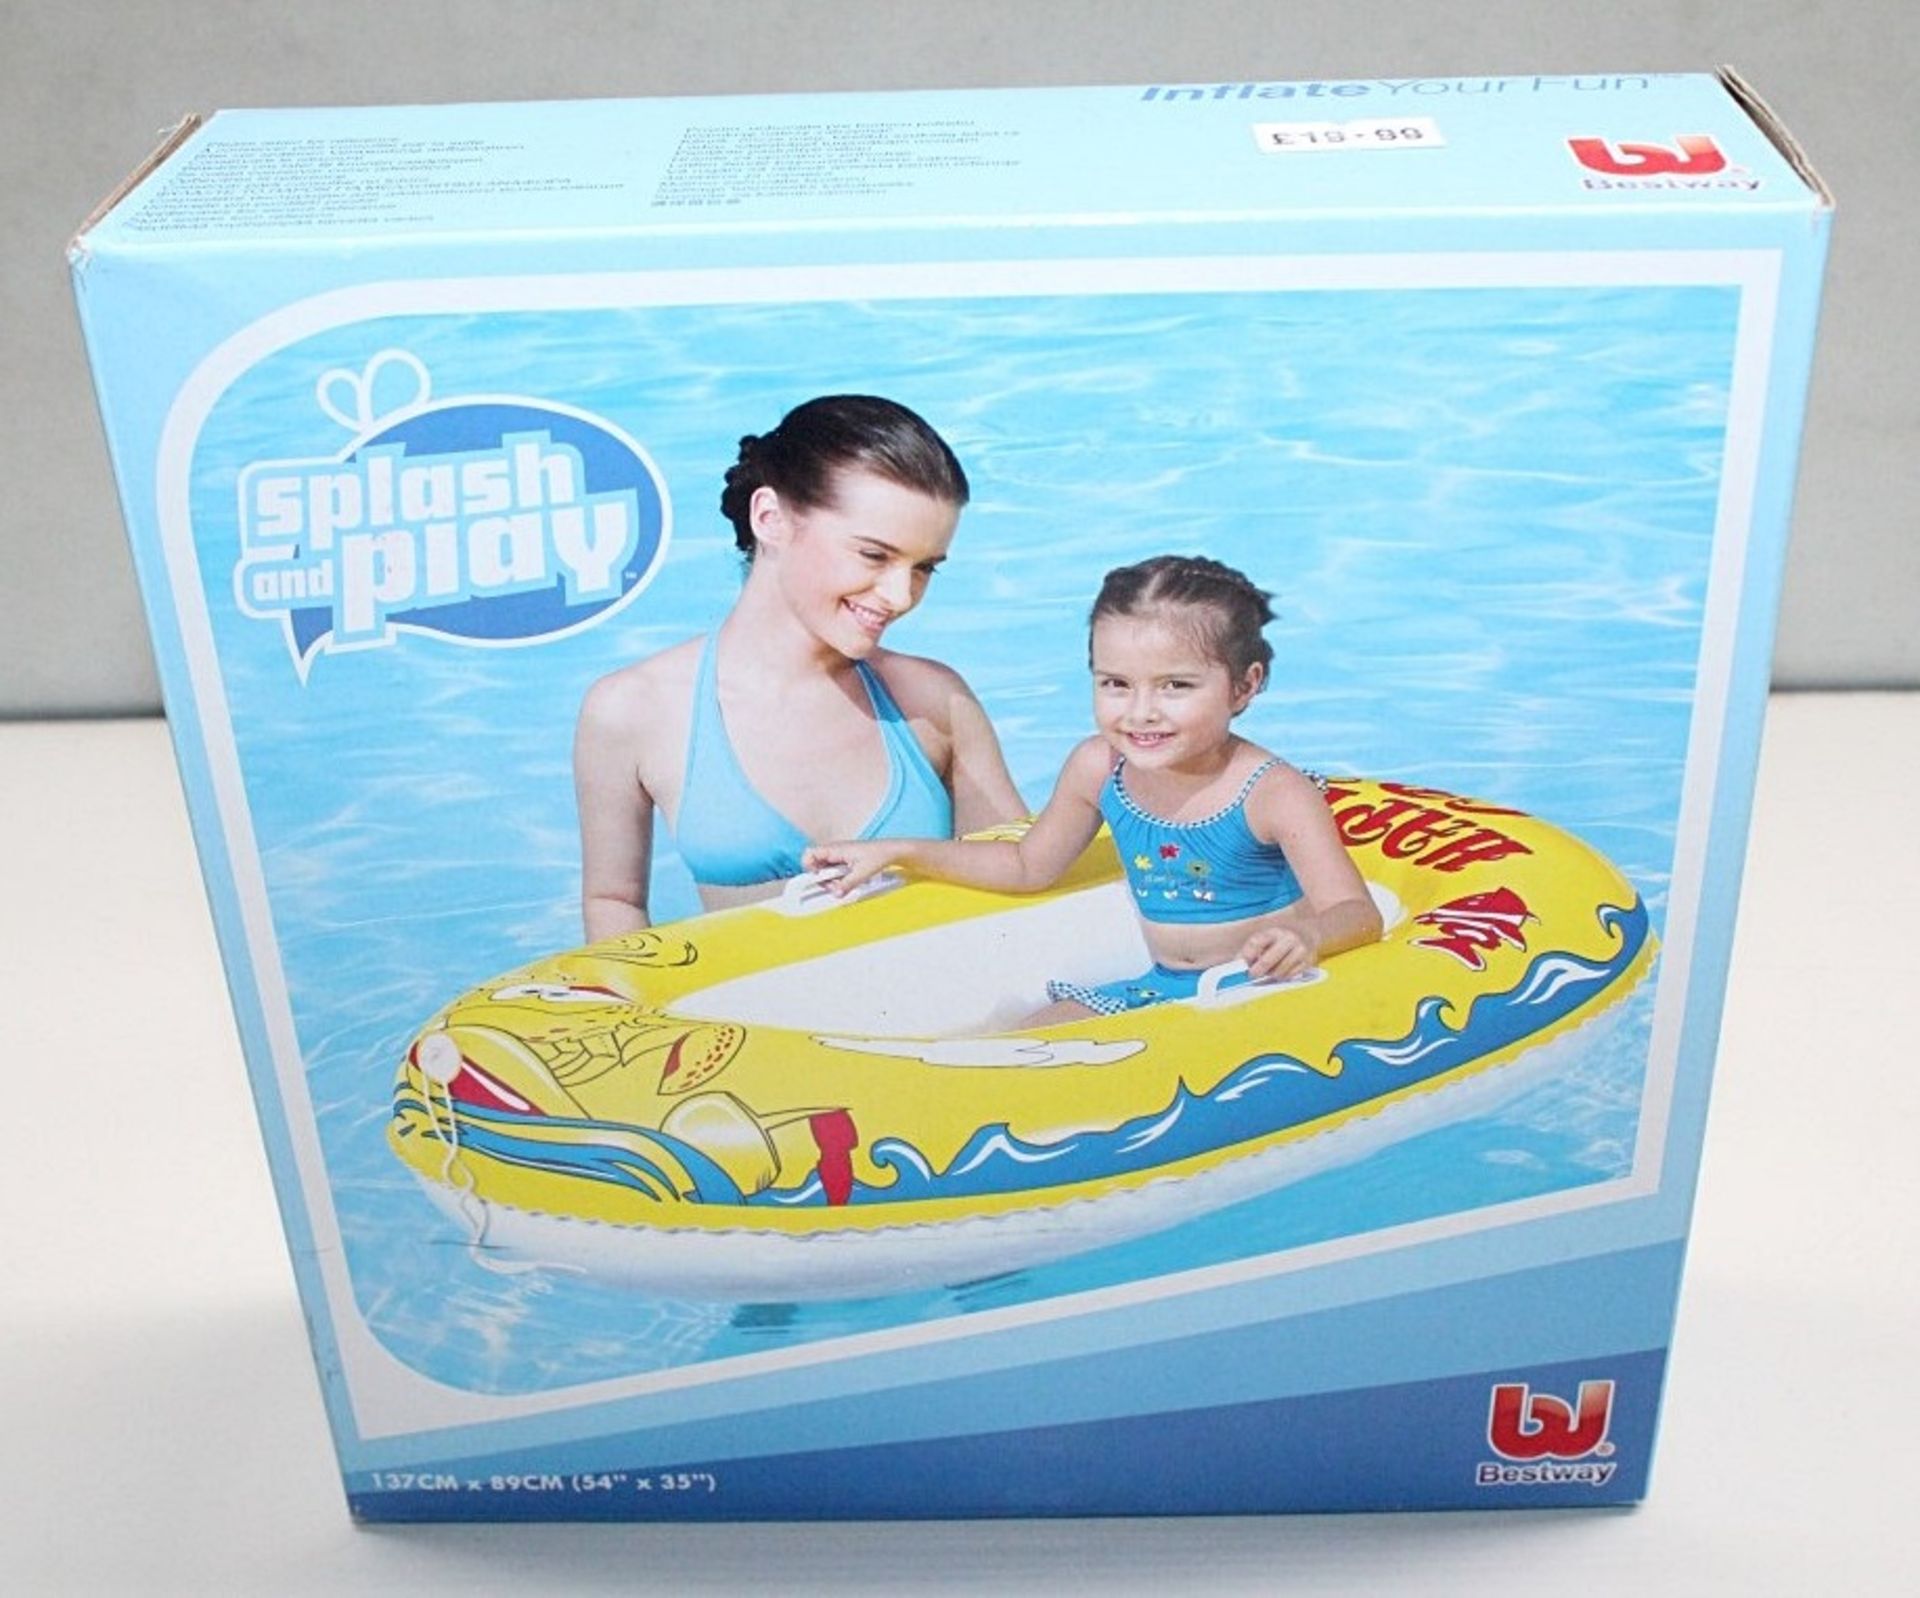 1 x Bestway 54" Inflatable Rubber Dinghy Boat Raft Pool Toy - New & Boxed -  Ref: JIM021B -